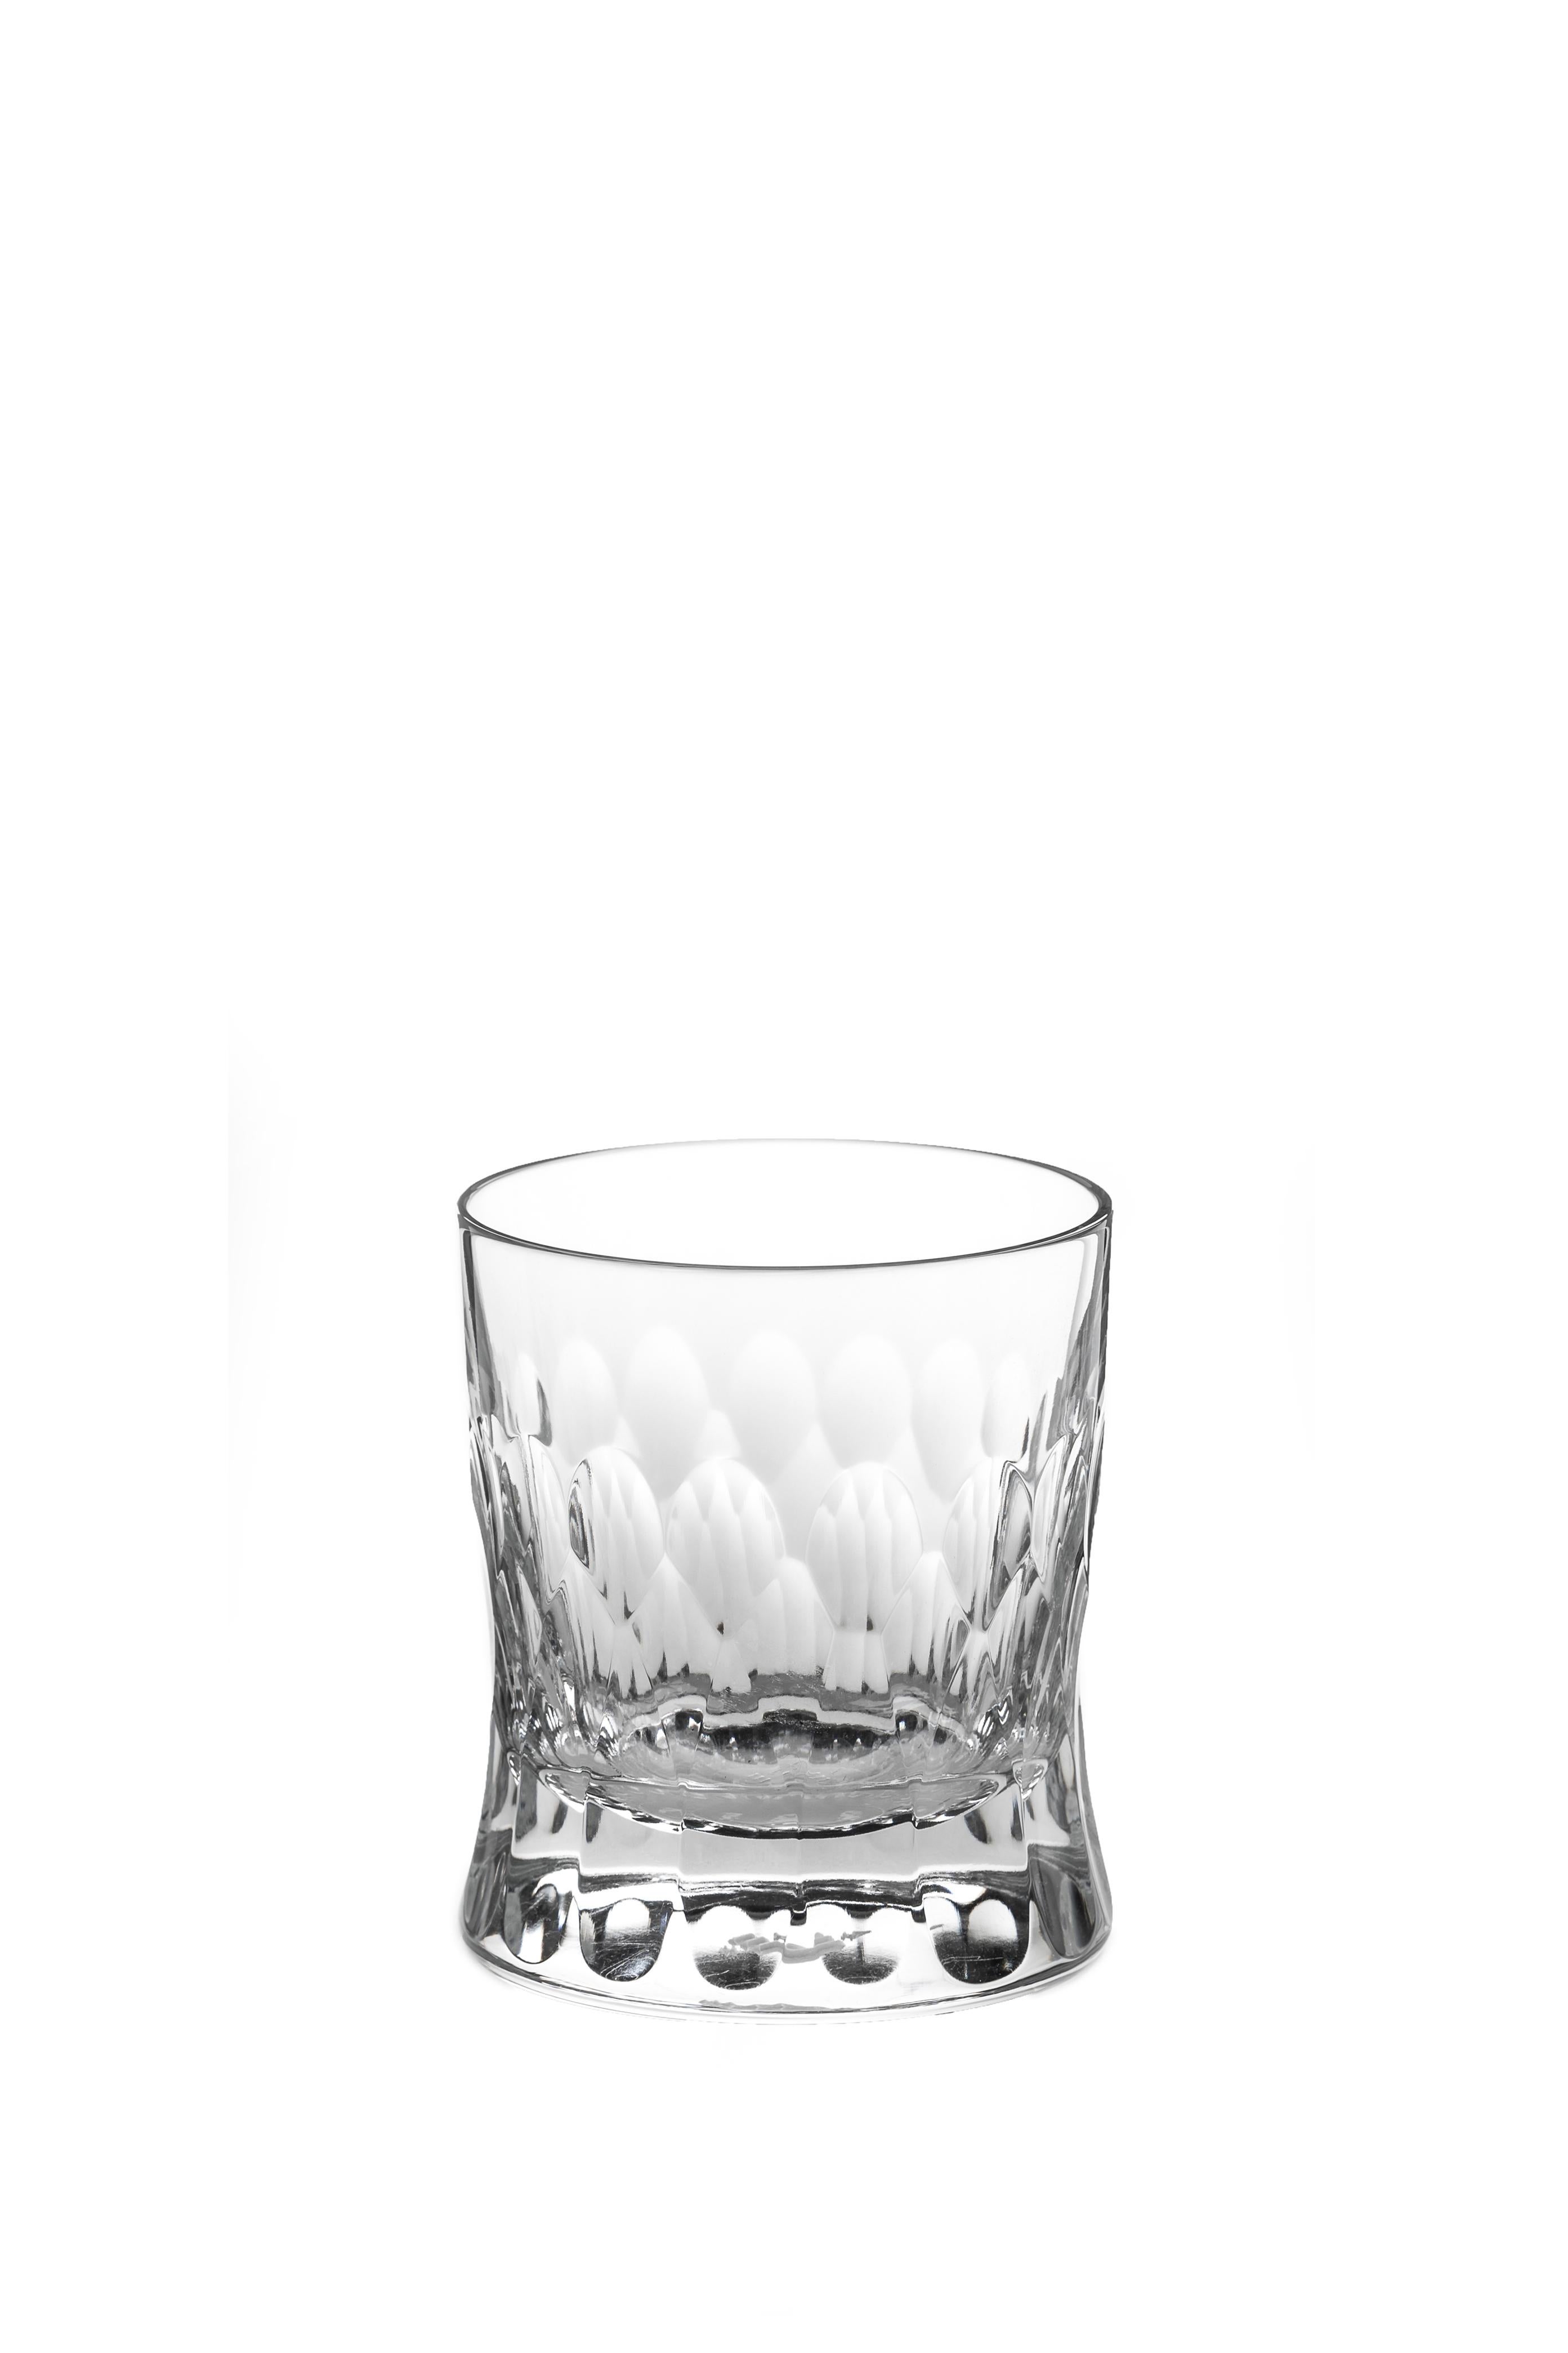 Martino Gamper Handmade Irish Crystal Whiskey Tumbler 'Cuttings' Series In New Condition For Sale In Ballyduff, IE